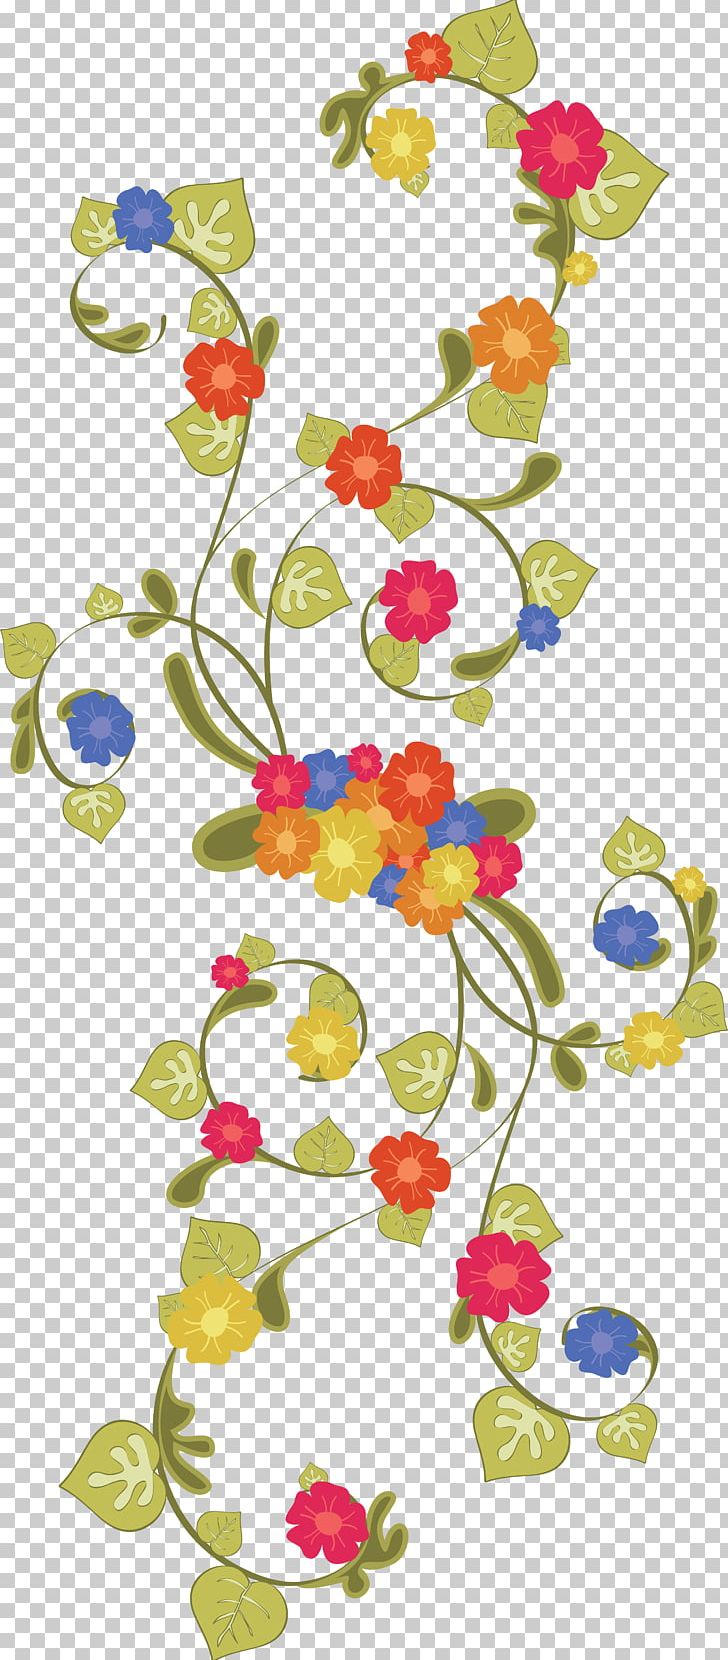 Paper Flower Floral Design Drawing PNG, Clipart, Artwork, Branch, Cut Flowers, Decorative Arts, Drawing Free PNG Download